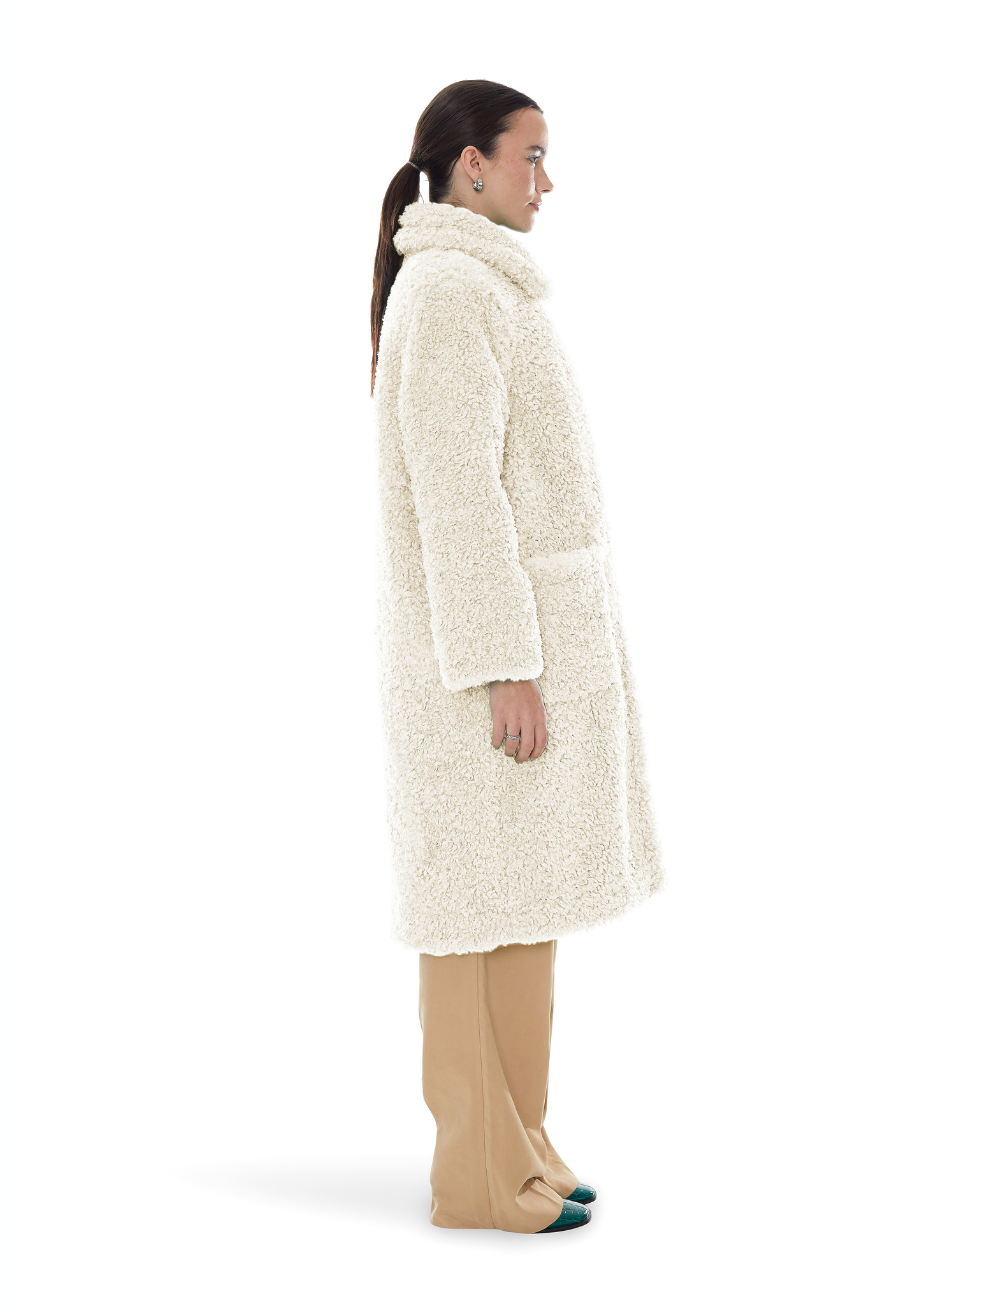 Ruby Curly Cream White Sustainable Fashion Made in Canada Vegan Sherpa